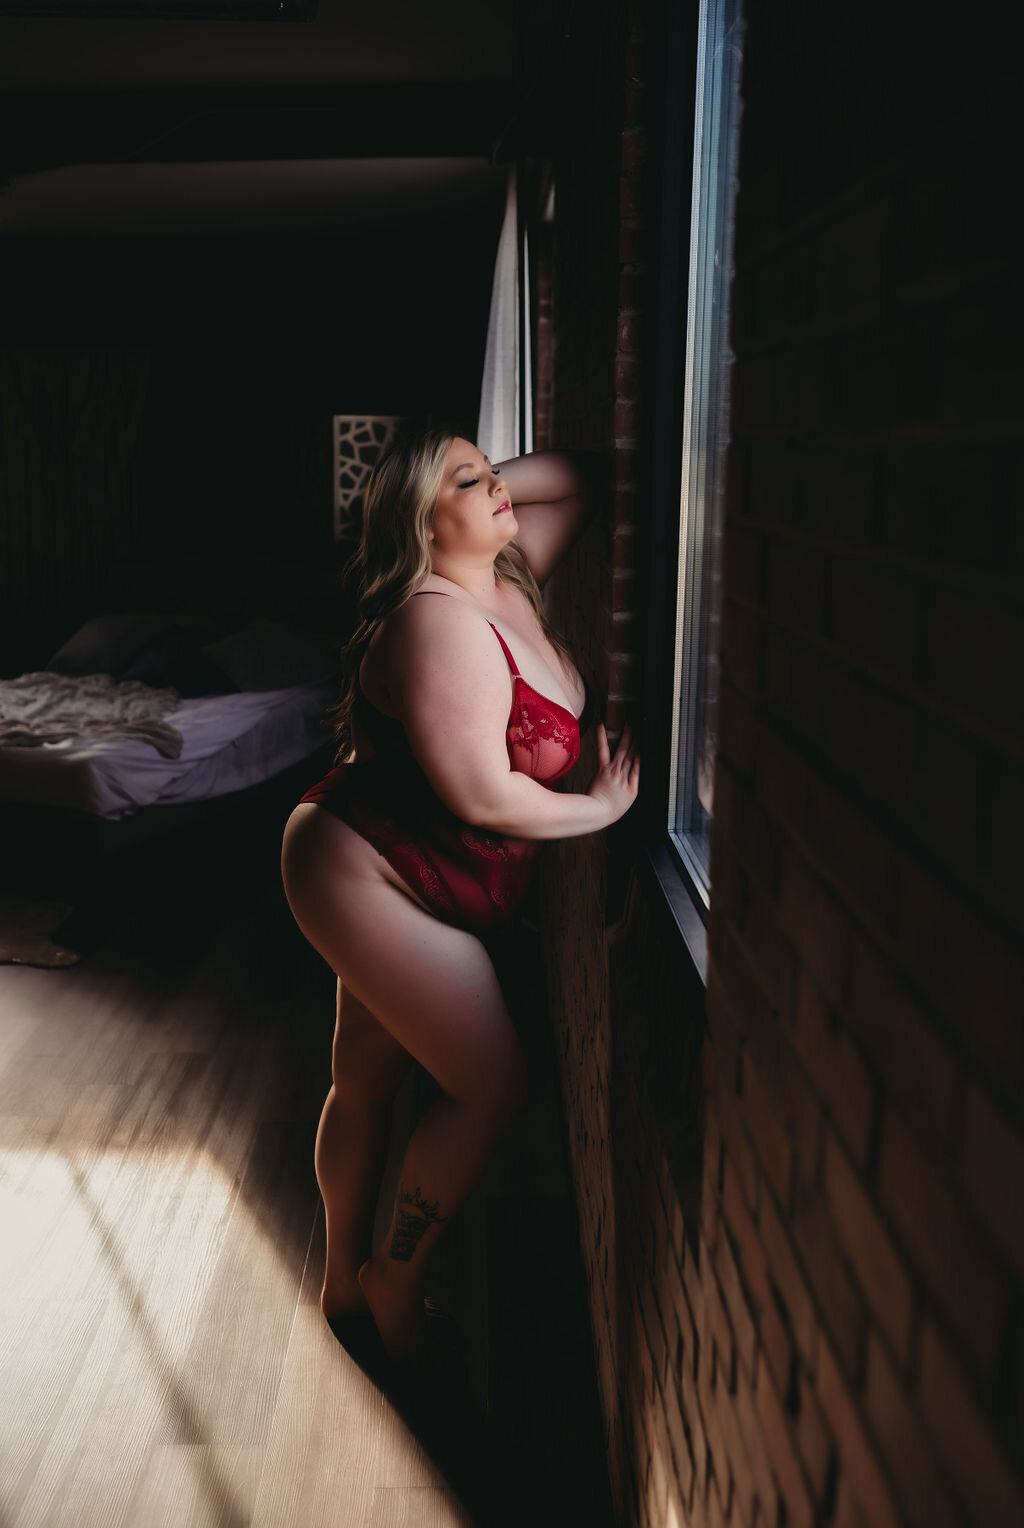 plus size woman in red lingerie leaning against brick wall looking out window with hand in hair